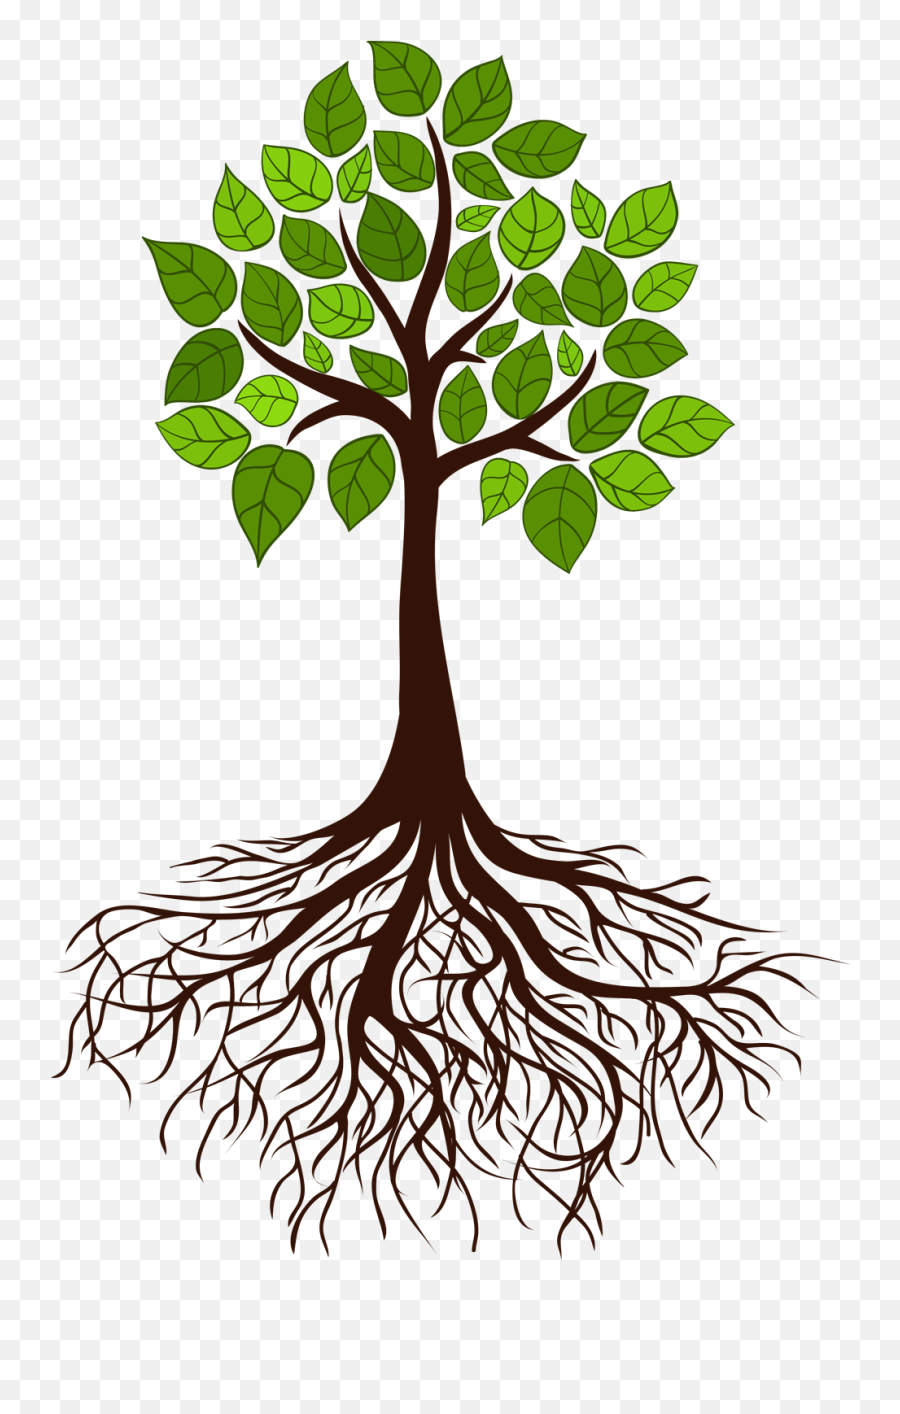 Tree Root Branch - Transparent Background Tree With Roots Clipart Emoji,Roots Png